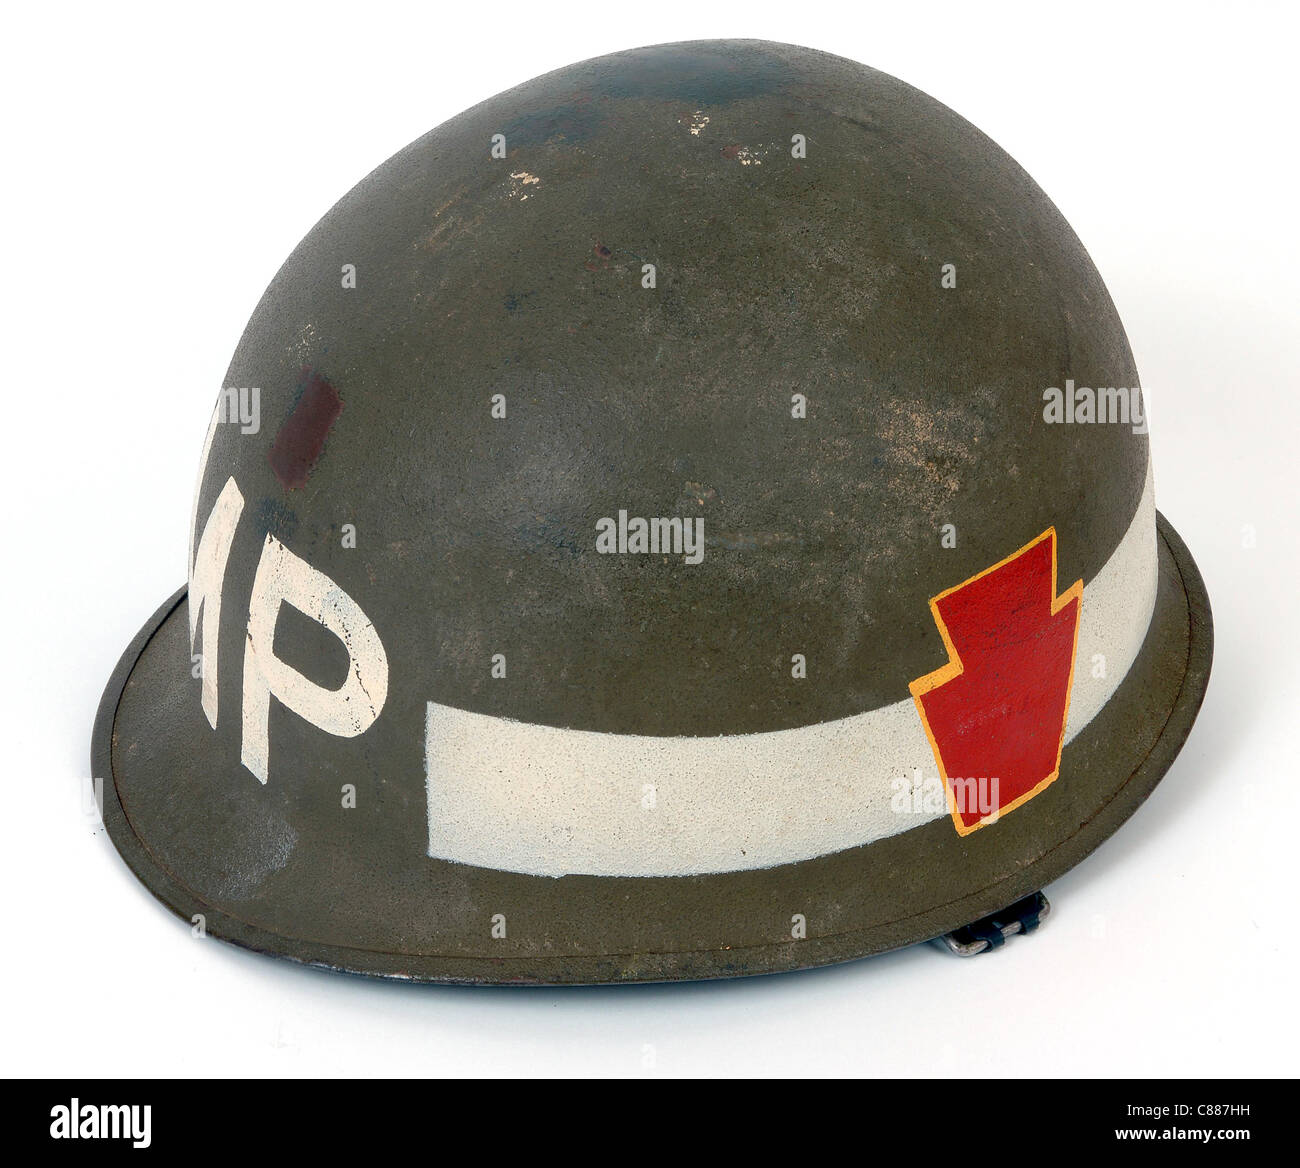 M1 combat steel helmet from the Vietnam war. American Military police, 28th infantry division logo to the side. Stock Photo